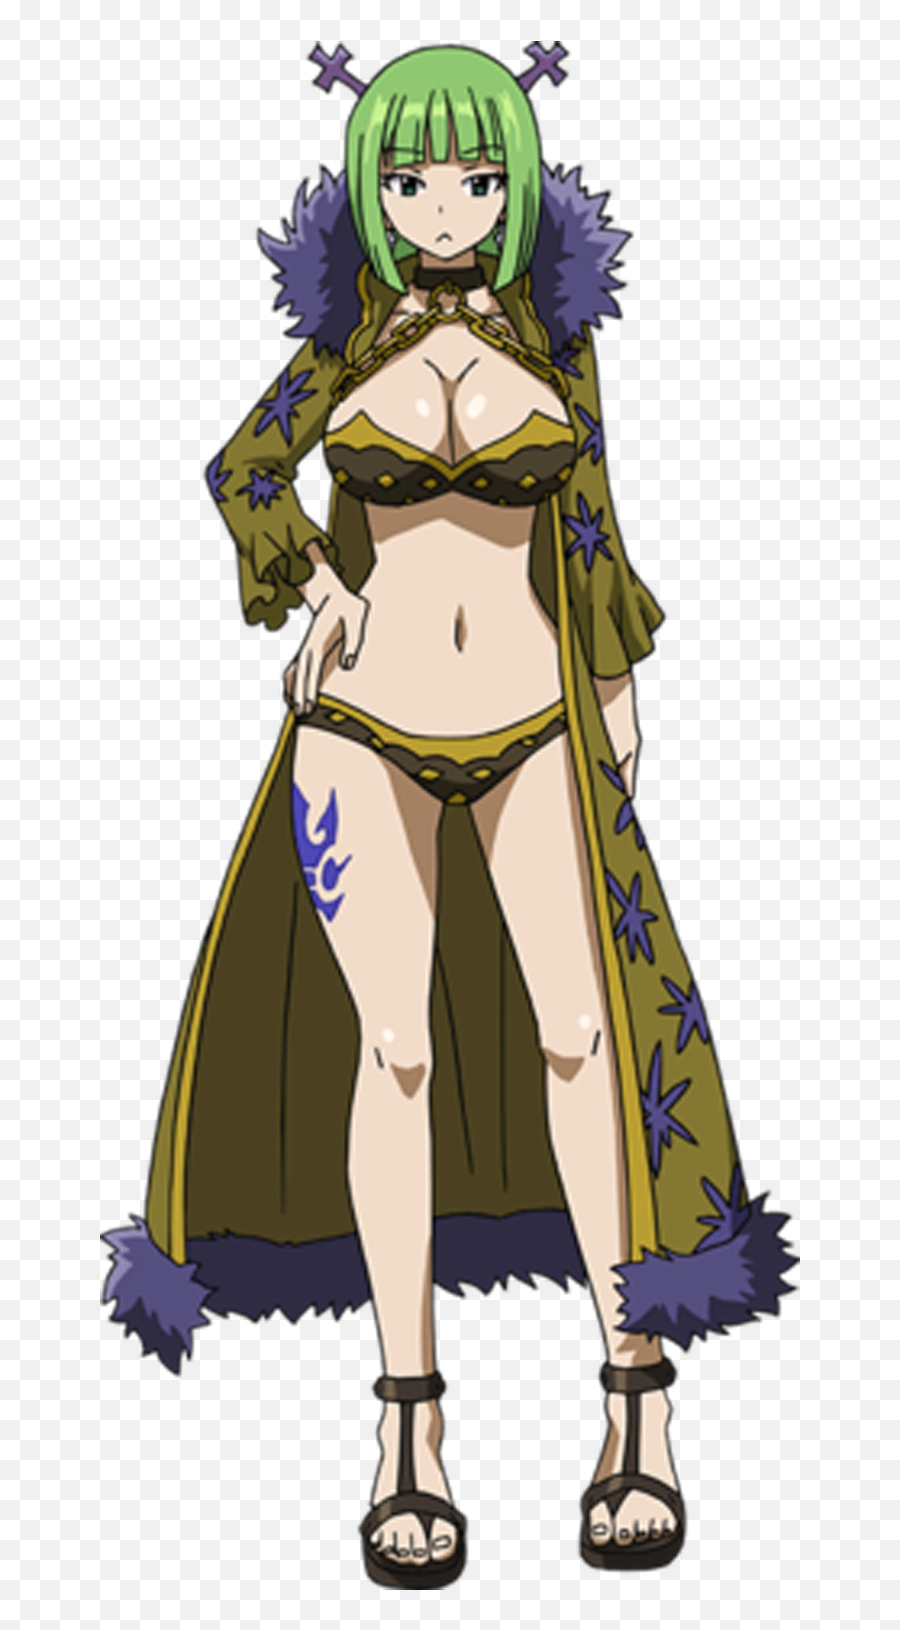 10 Fairy Tail Ideas Anime - Fairy Tail Brandish Outfit Png,Erza Scarlet Icon